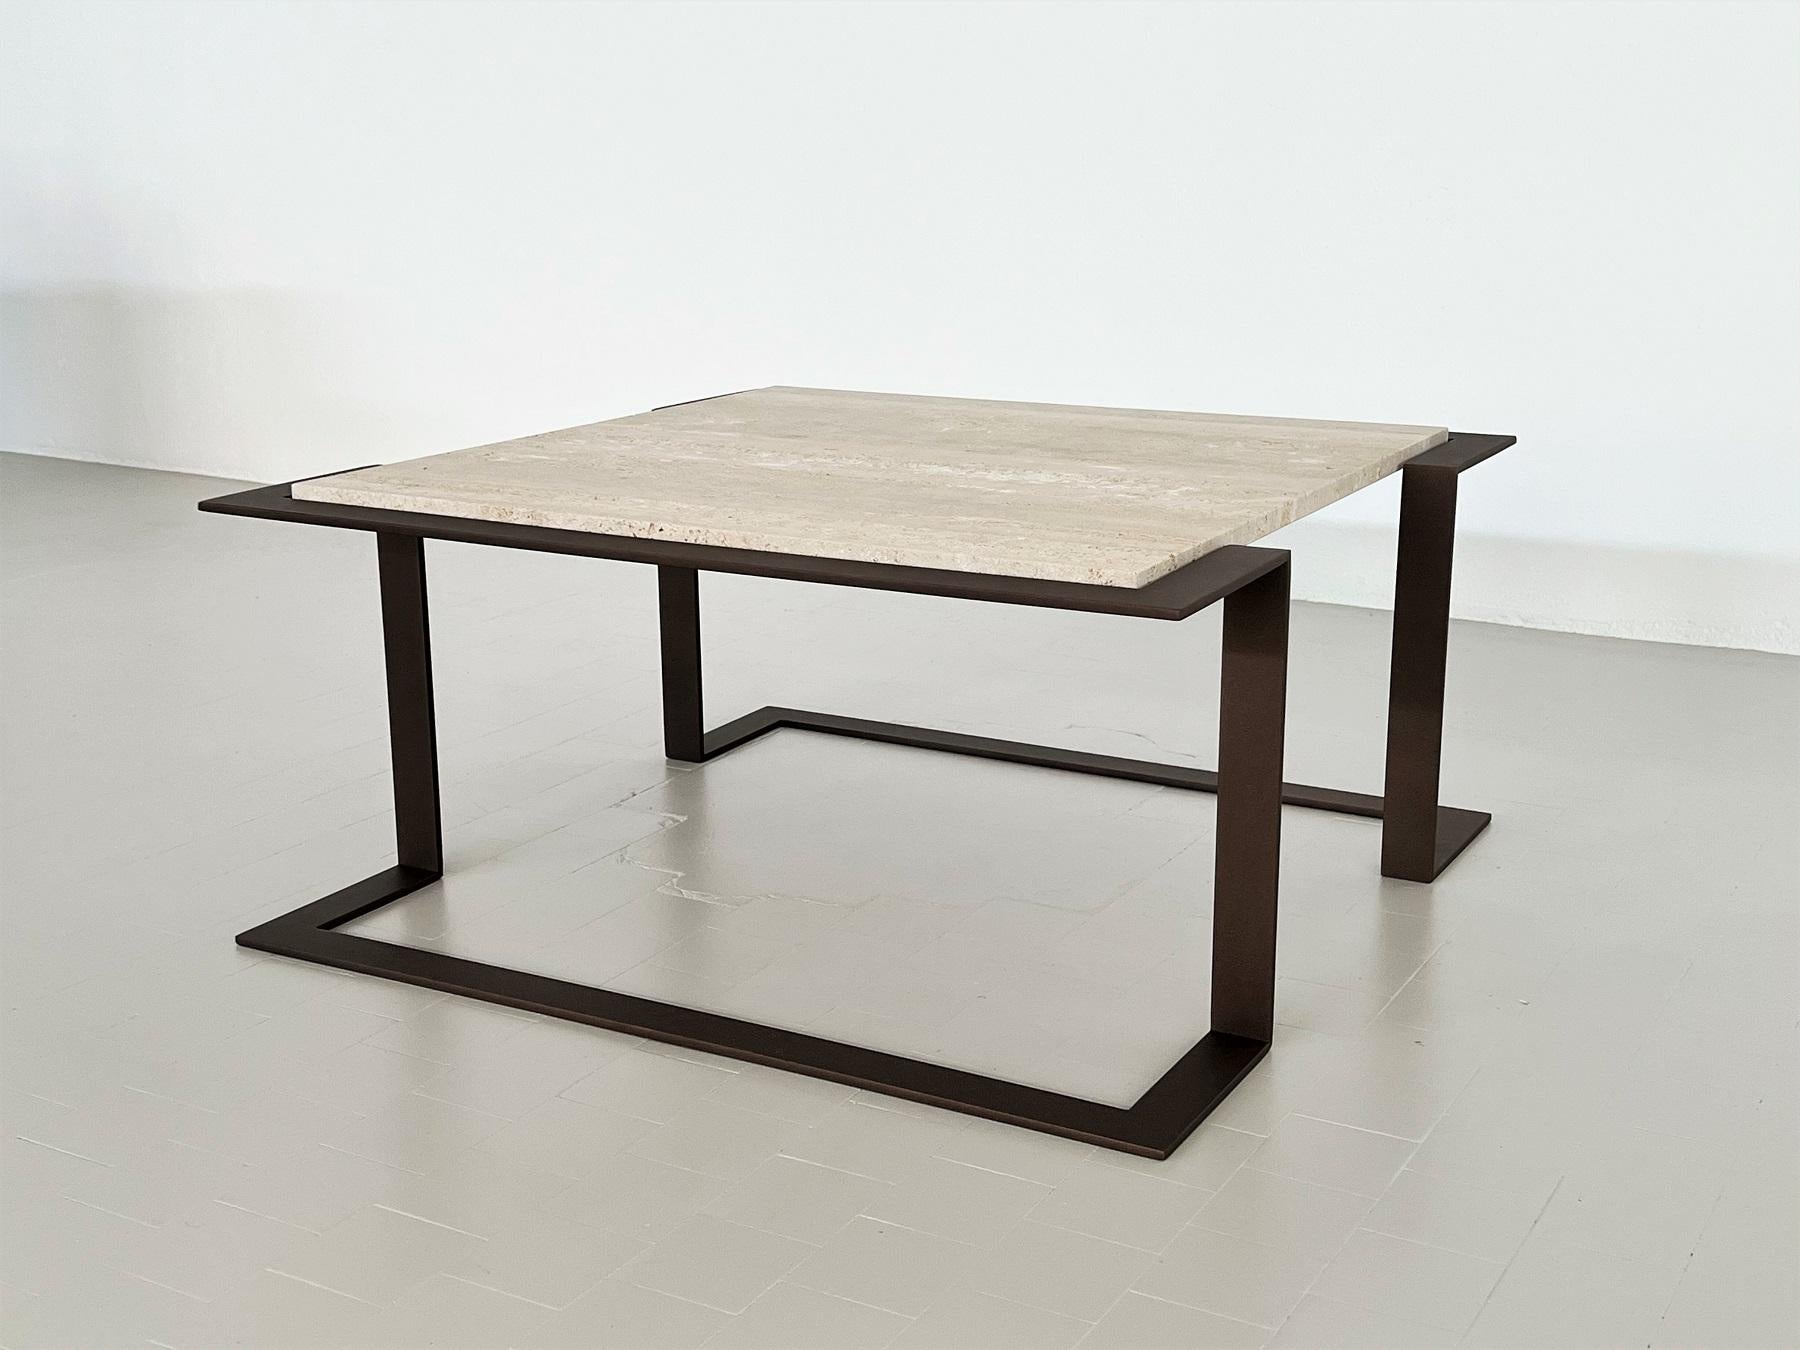 Italian Mid-Century Travertine Marble Coffee Table and Metal Base, 1970 For Sale 6